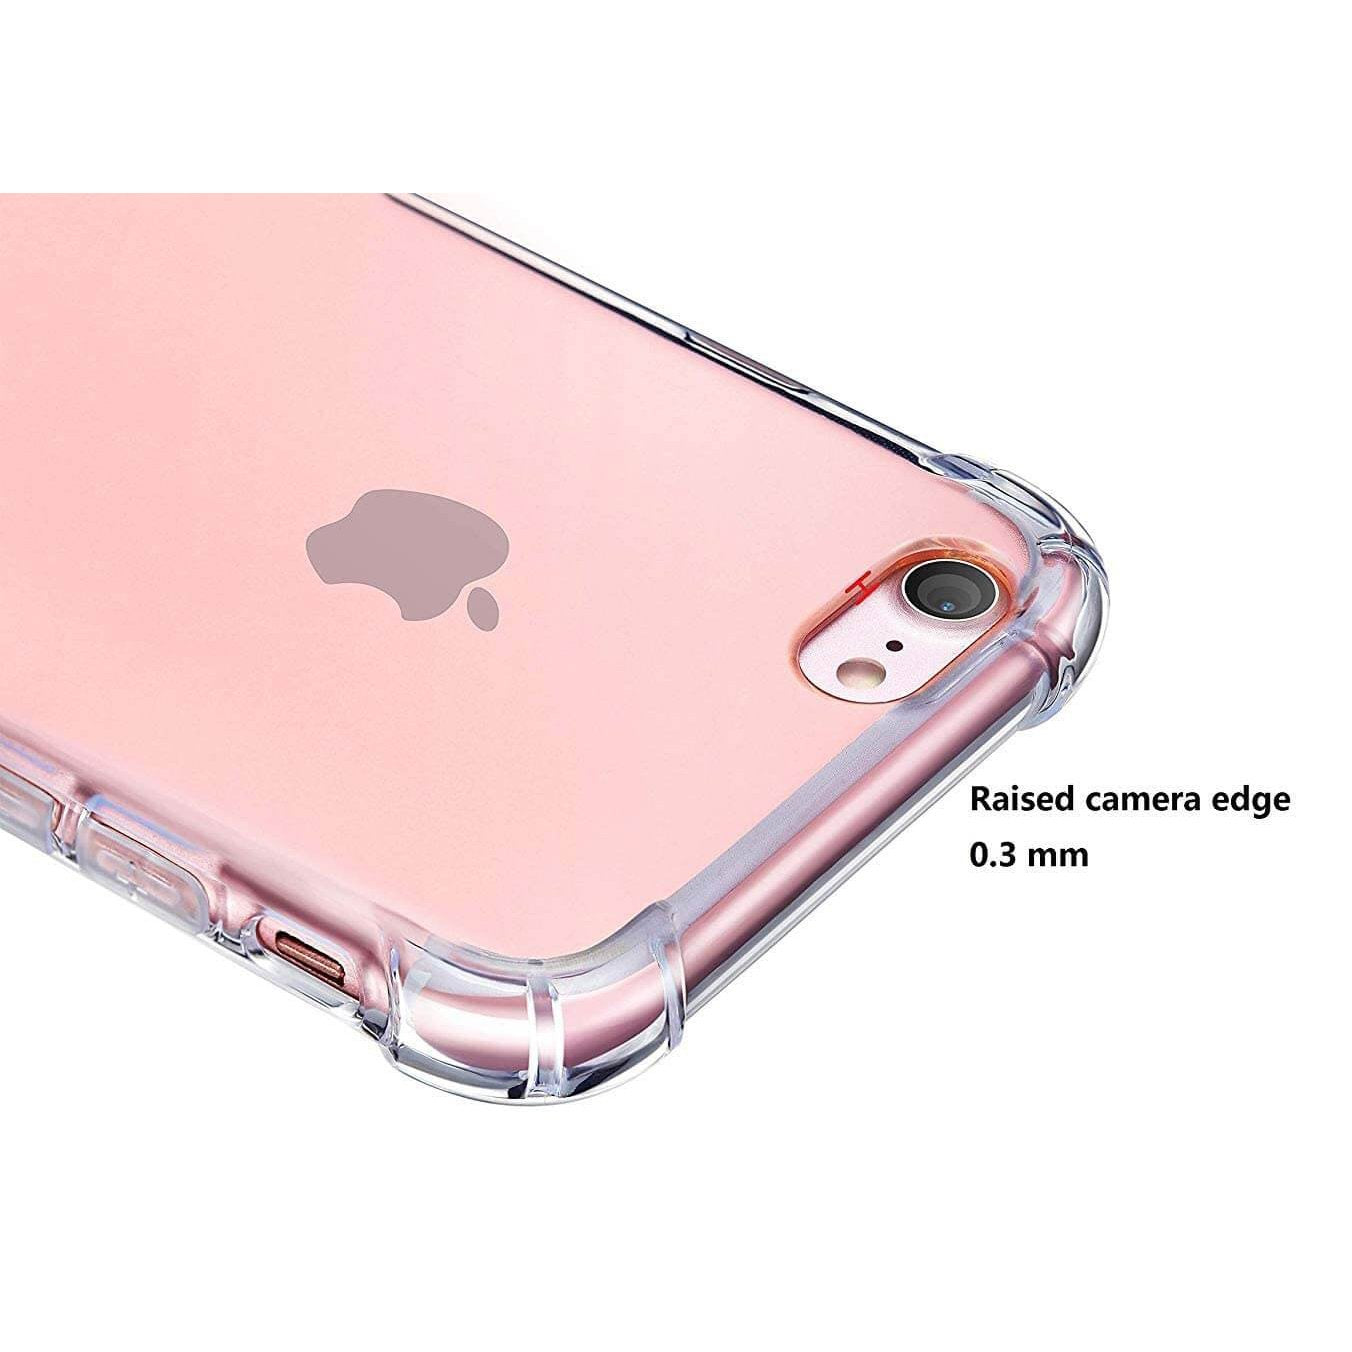 For Apple iPhone SE 2020 Case Cover Clear ShockProof Soft TPU Silicone